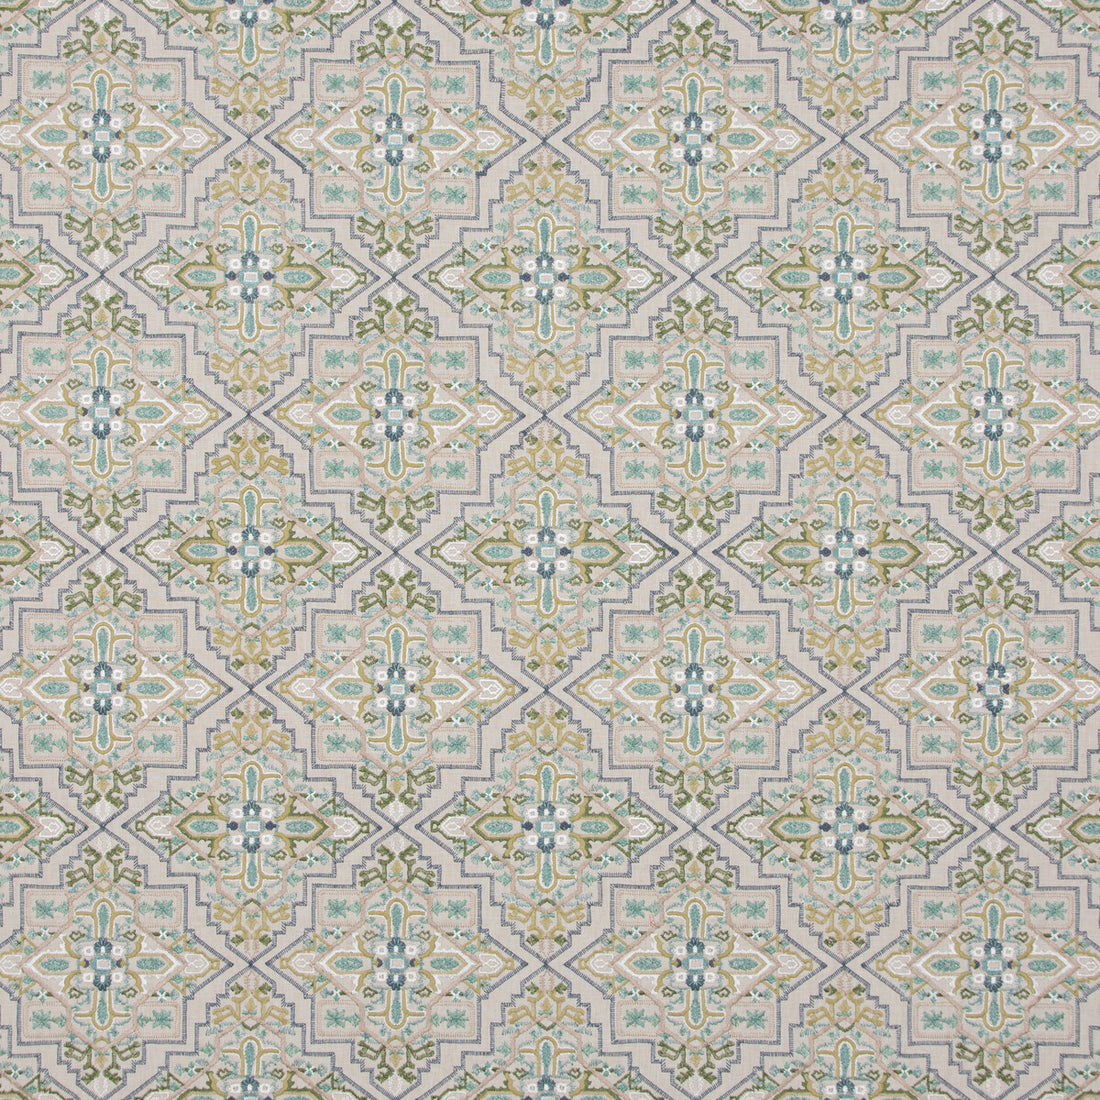 Benaki fabric in aqua color - pattern BF10940.1.0 - by G P &amp; J Baker in the Caspian collection